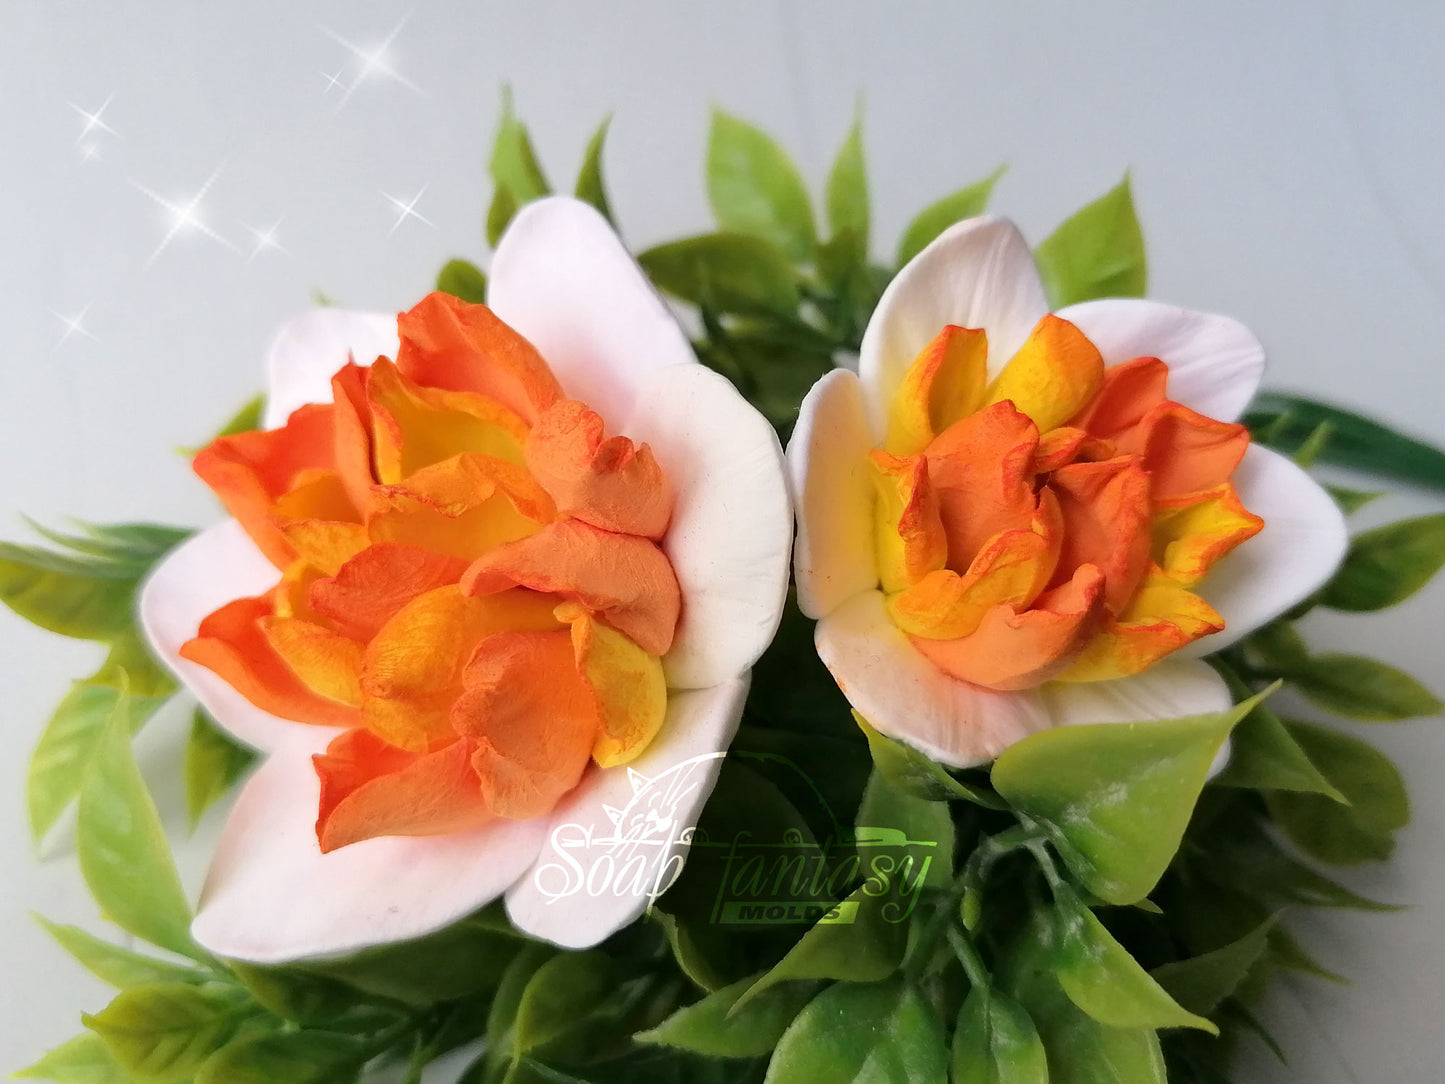 Terry narcissus / daffodil (mini) flower silicone mold for soap making